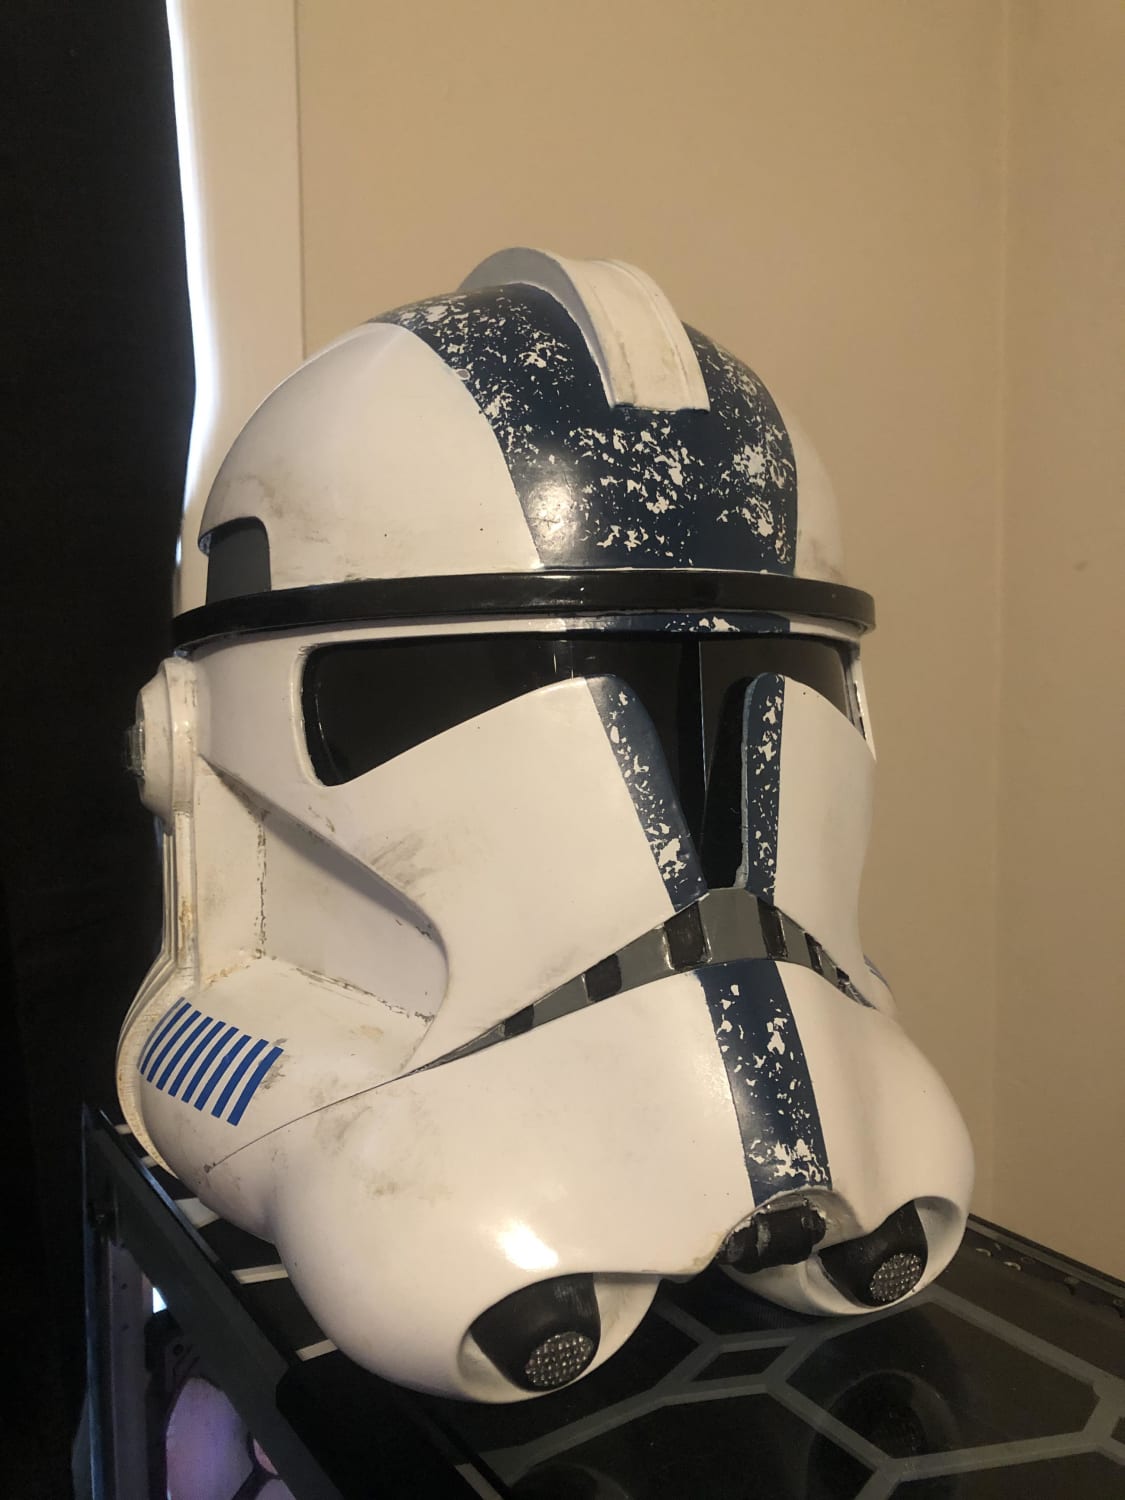 Sorry to add to the endless Star Wars helmets but here's my phase 2 clone trooper.